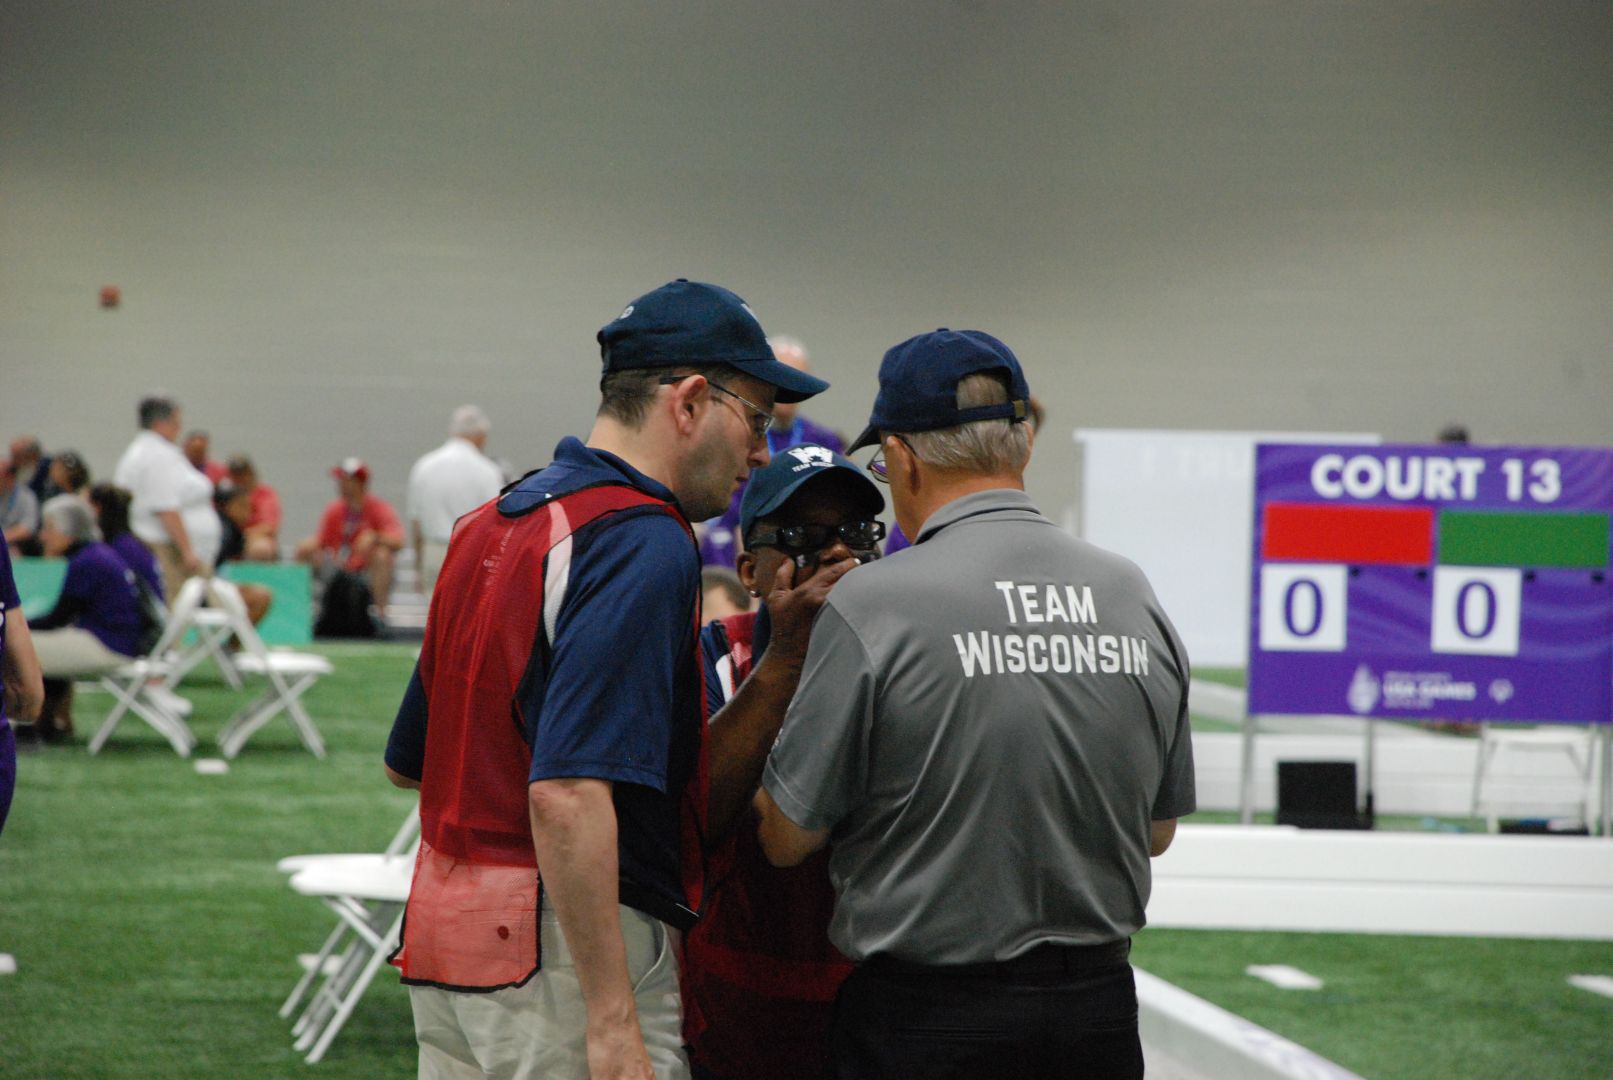 Jonathan Frank and Cindy Bentley talk strategy with Coach John Haberle during Tuesday's doubles pool play